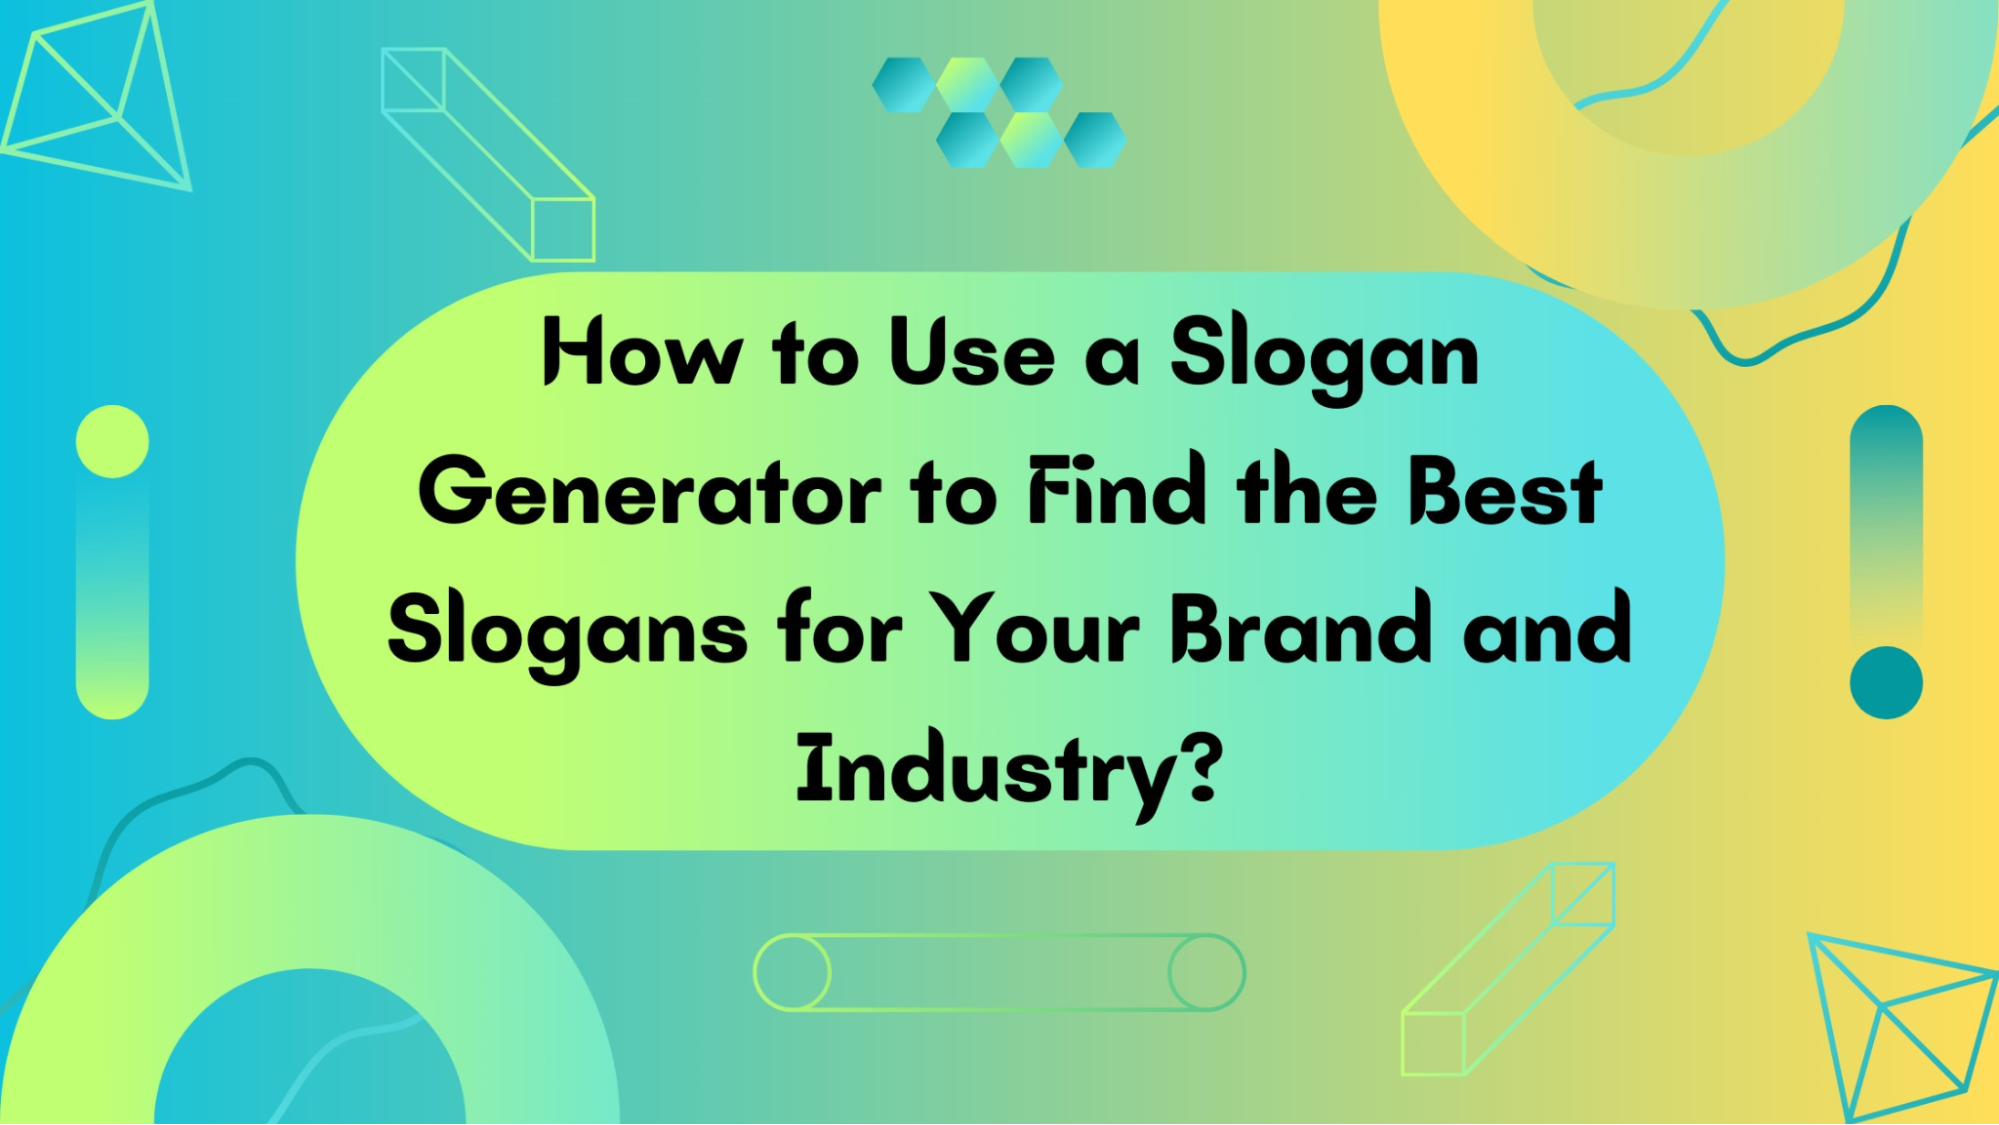 How to Use a Slogan Generator to Find the Best Slogans for Your Brand and Industry?